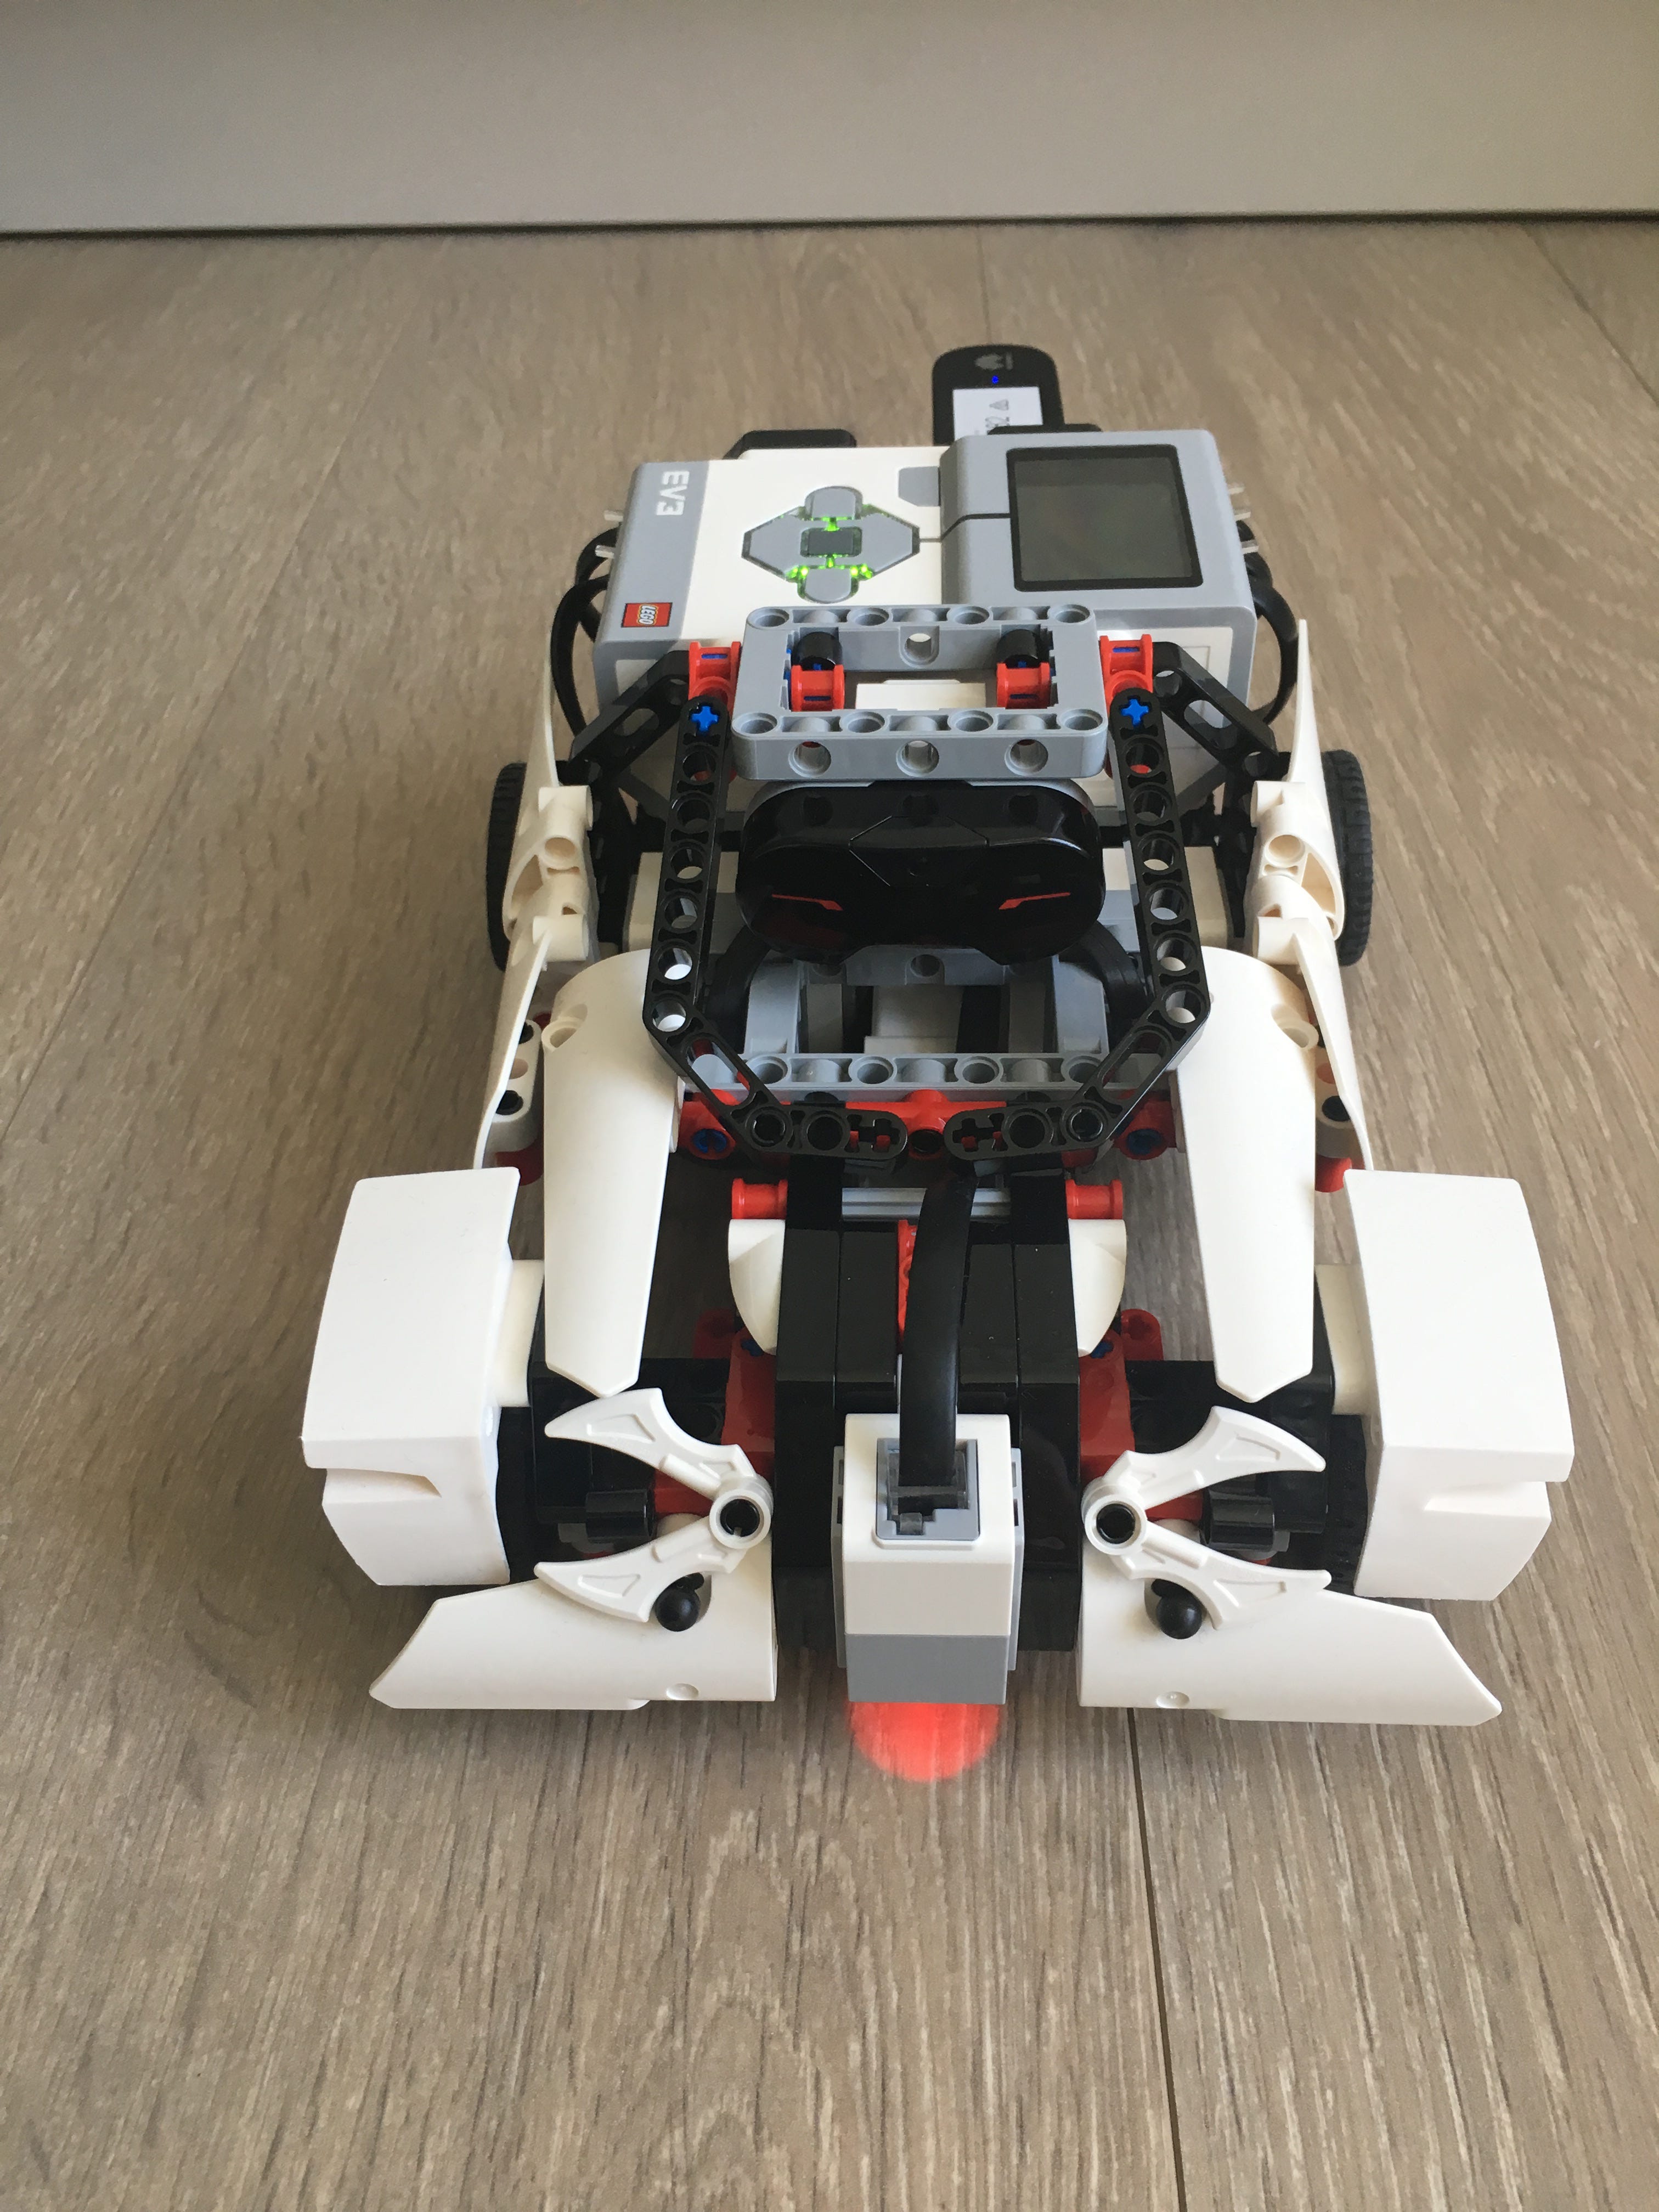 remote control of a lego mindstorms robot over the internet